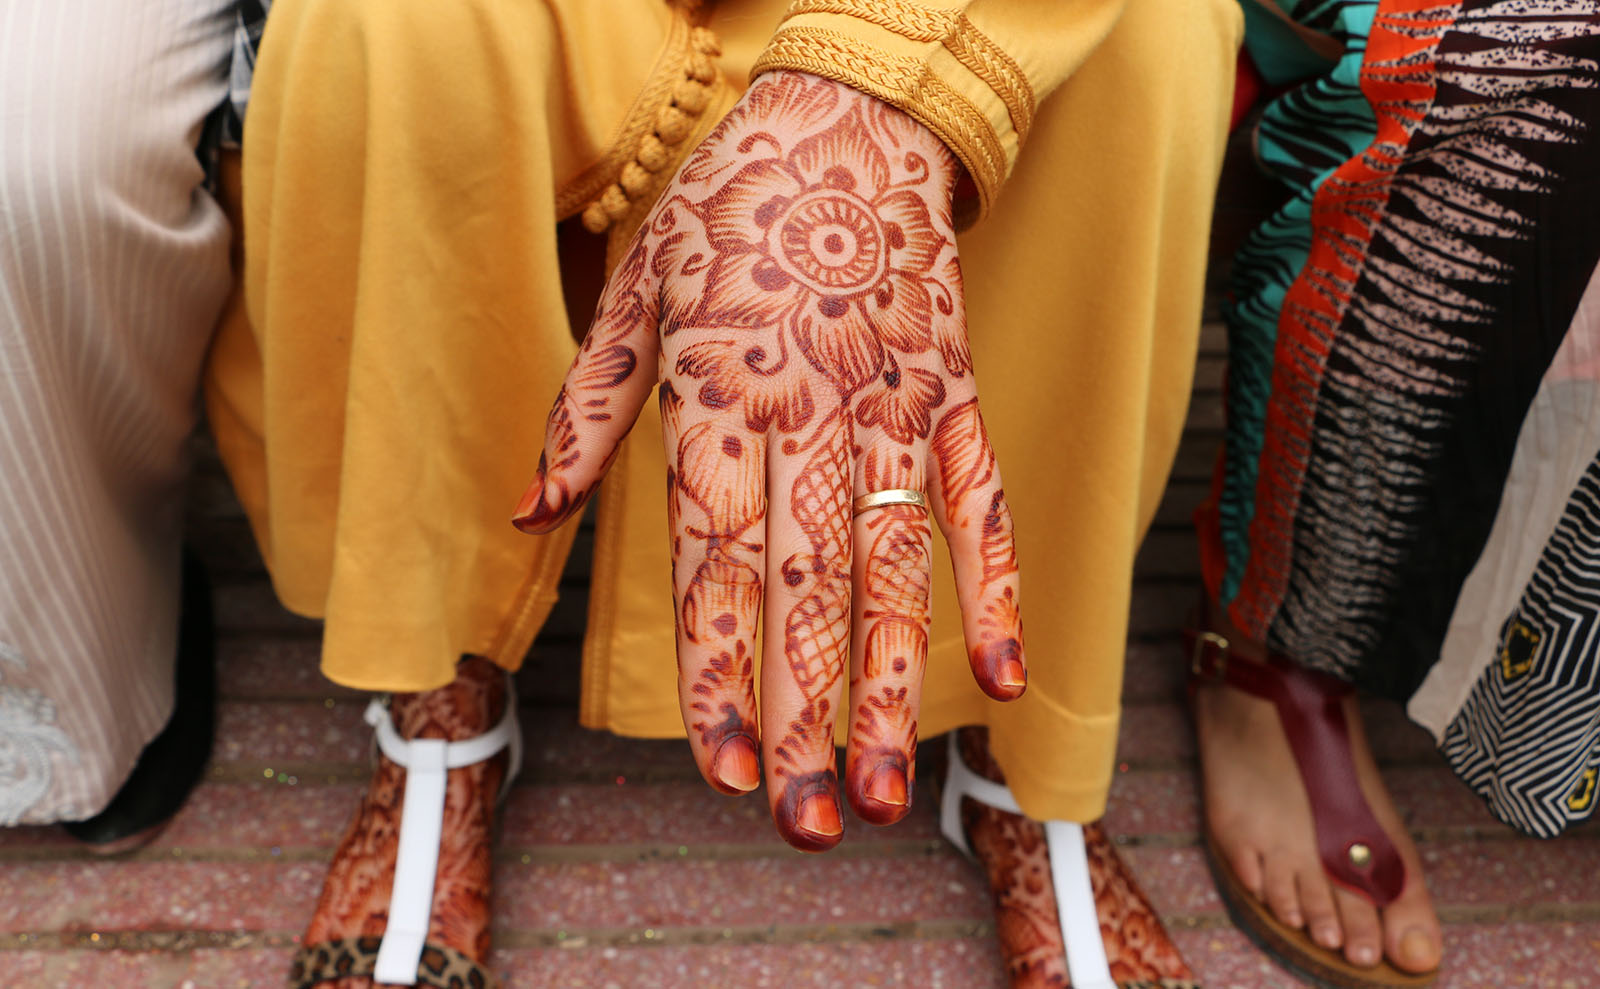 a woman's hands displaying red henna tattoos